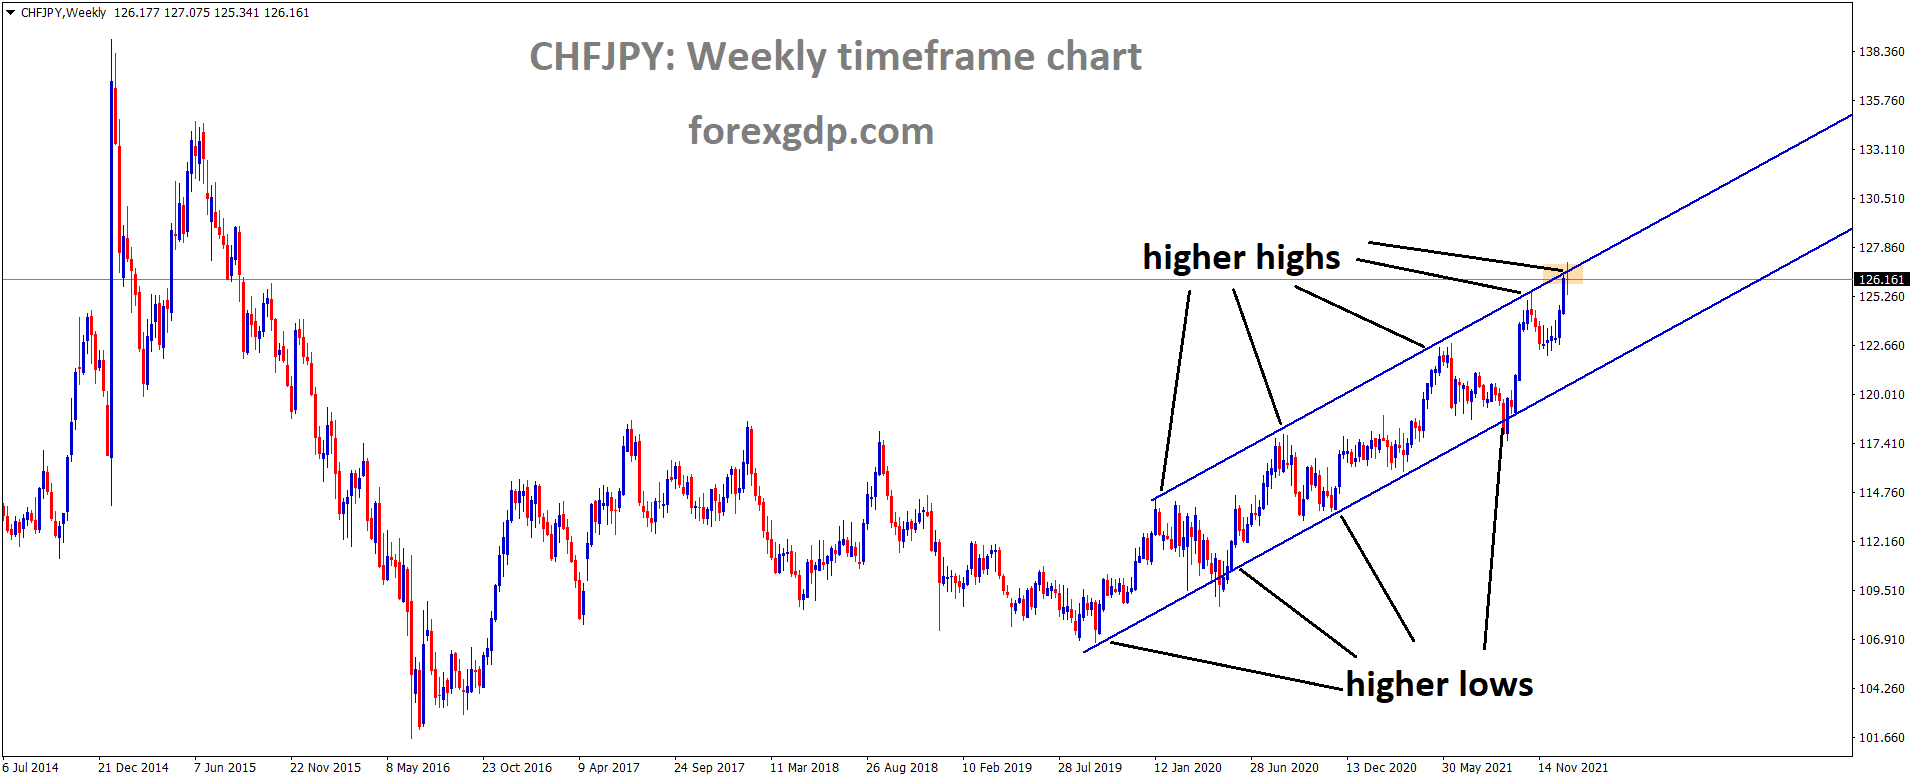 CHFJPY is moving in an Ascending channel and the market has reached the higher high area of the channel